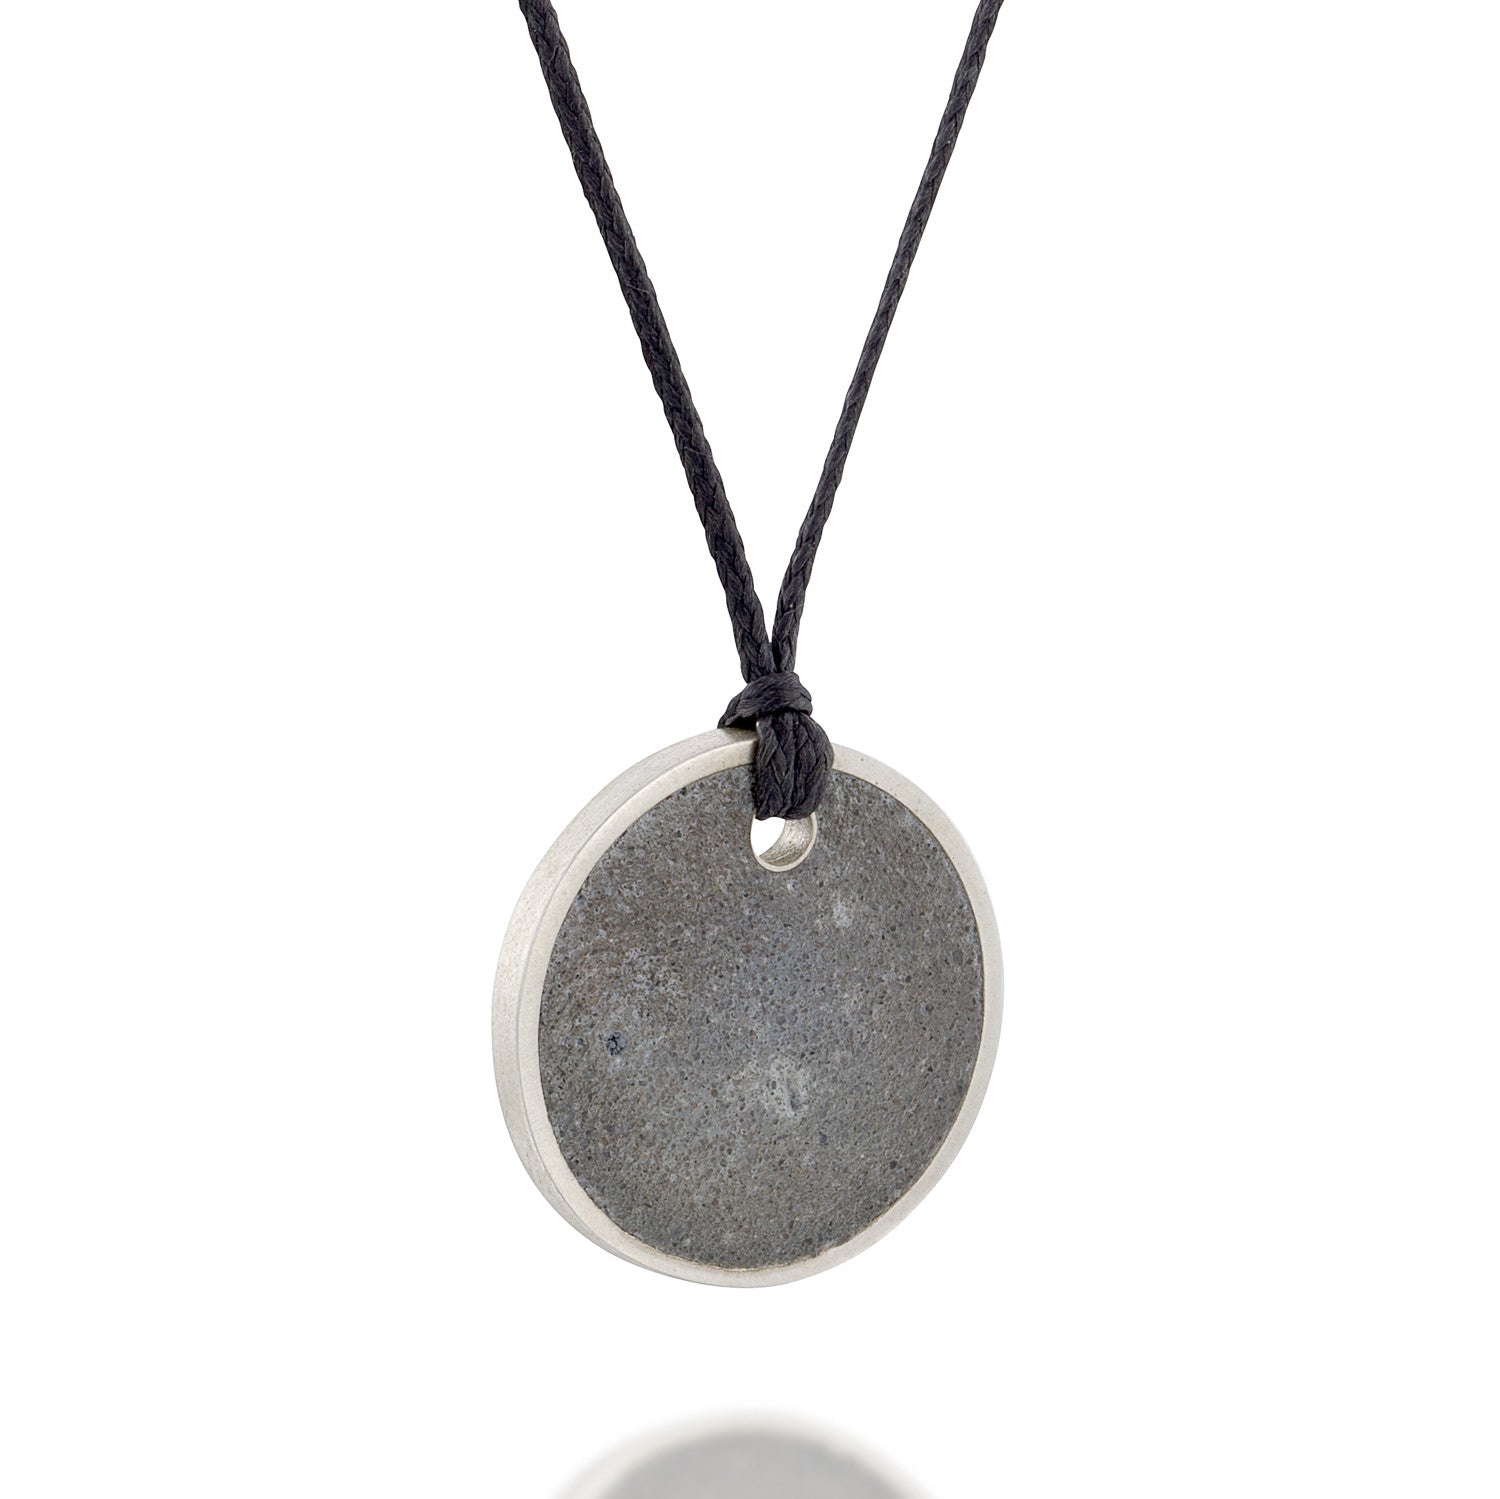 Unisex Silver and Concrete Necklace, by BAARA Jewelry. Unisex Circular Simple Pendant on a Black String